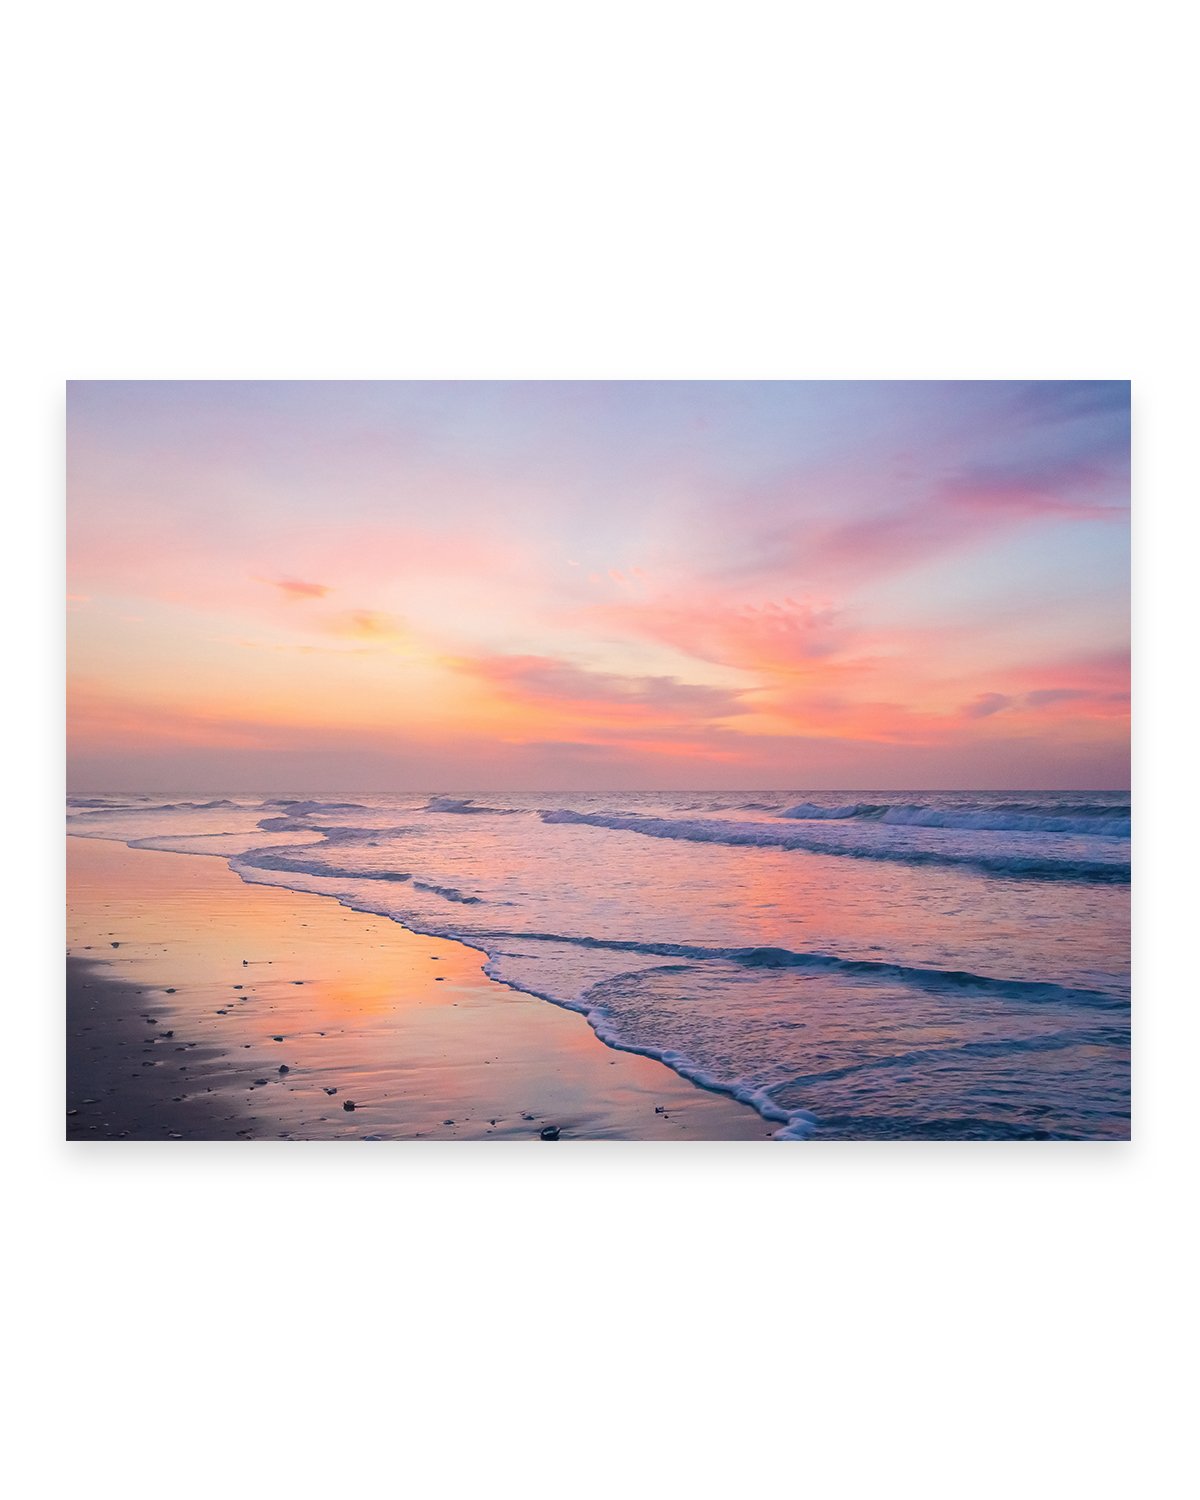 colorful pink and purple sunrise Wrightsville beach photograph by Wright and Roam